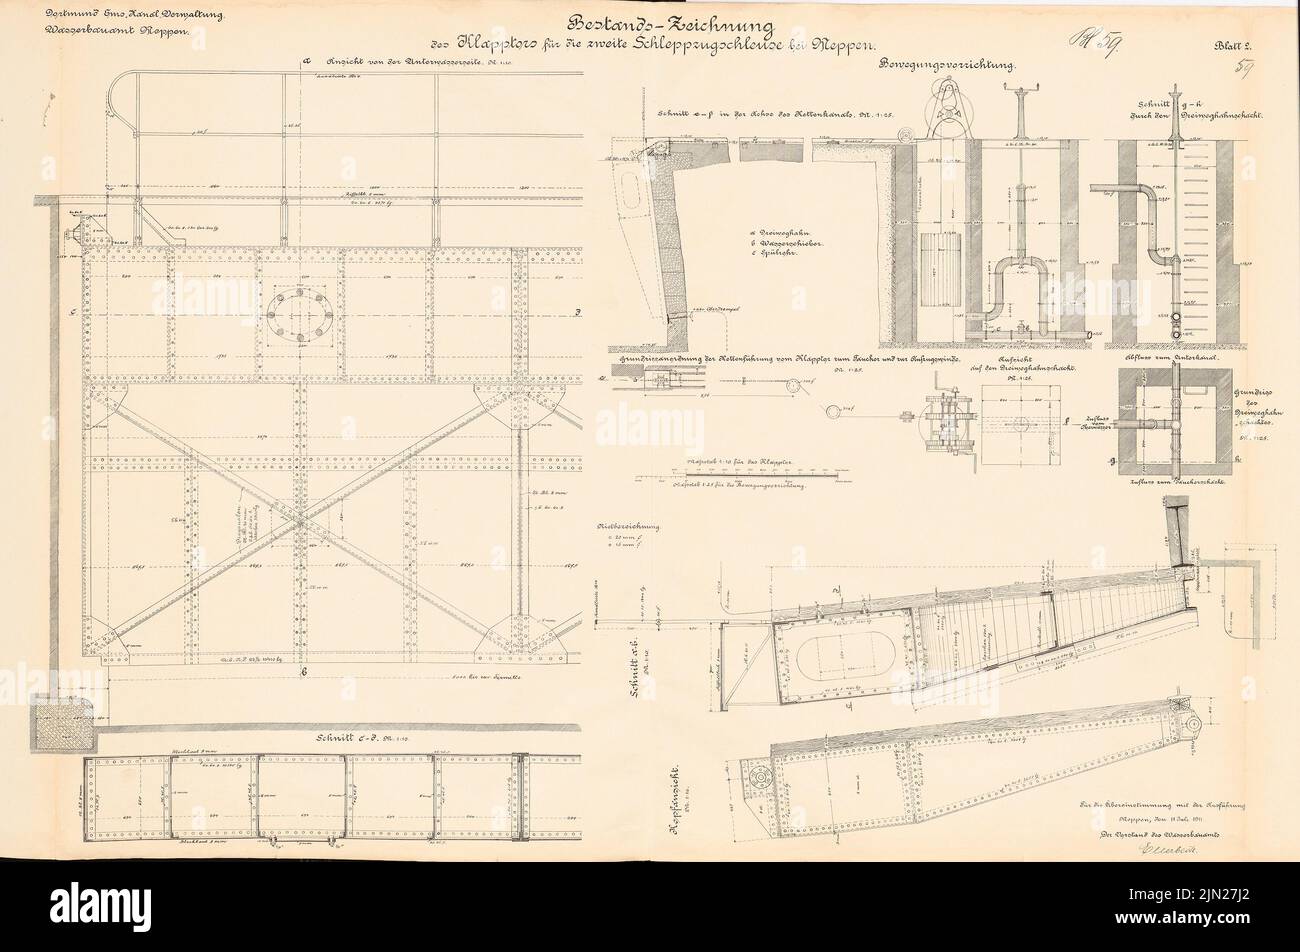 N.N., Dortmund-Ems-Canal. 2. Track train lock, Meppen: folding gate, movement device: view, supervision, cuts 1:25, 1:10. Lithograph on paper, 67.8 x 102.2 cm (including scan edges) Stock Photo